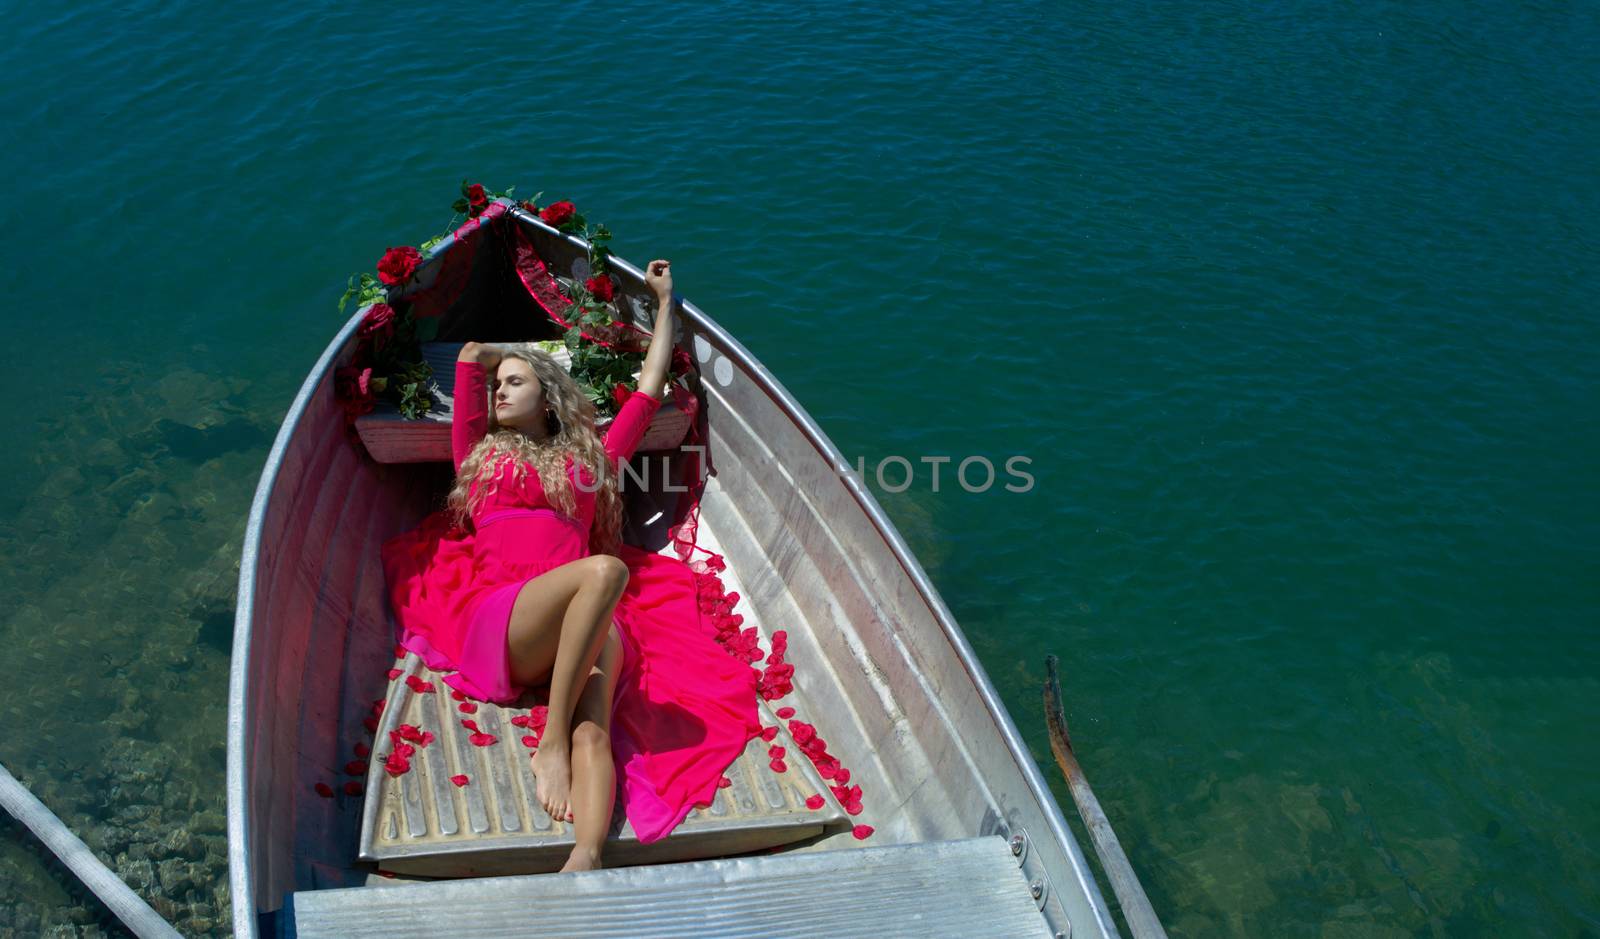 Life style woman with red dress and roses on a lake by PeterHofstetter